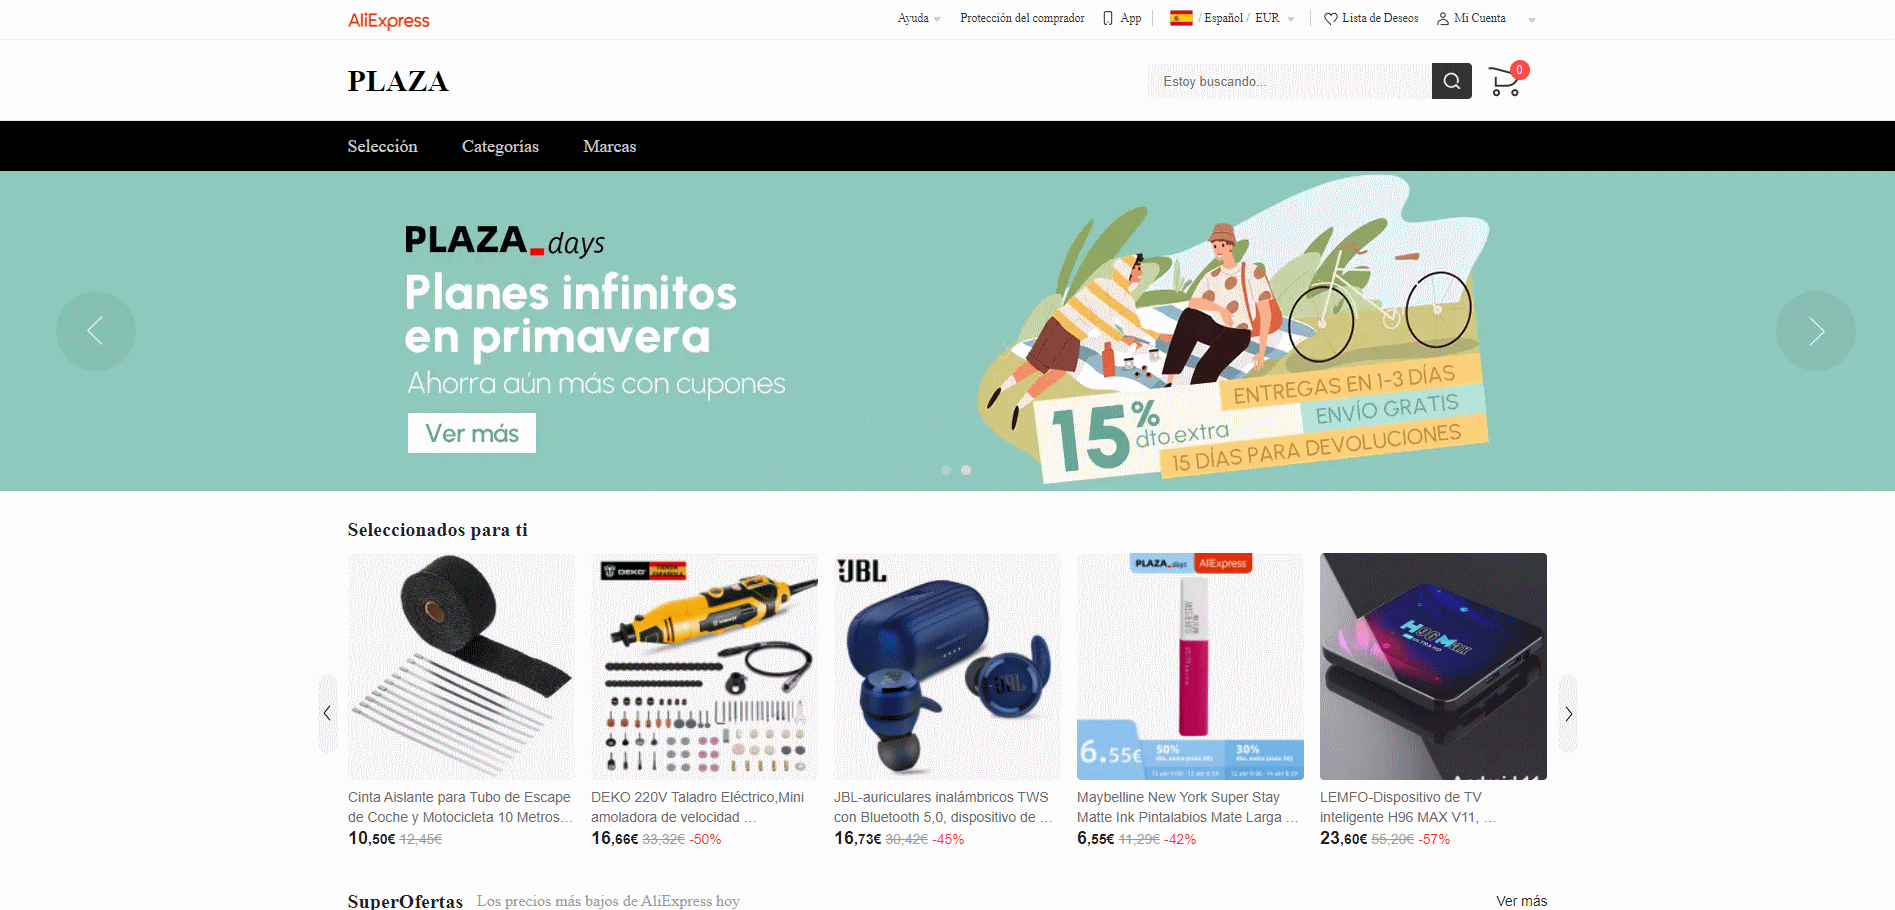 Aliexpress Top Selling Products 2021